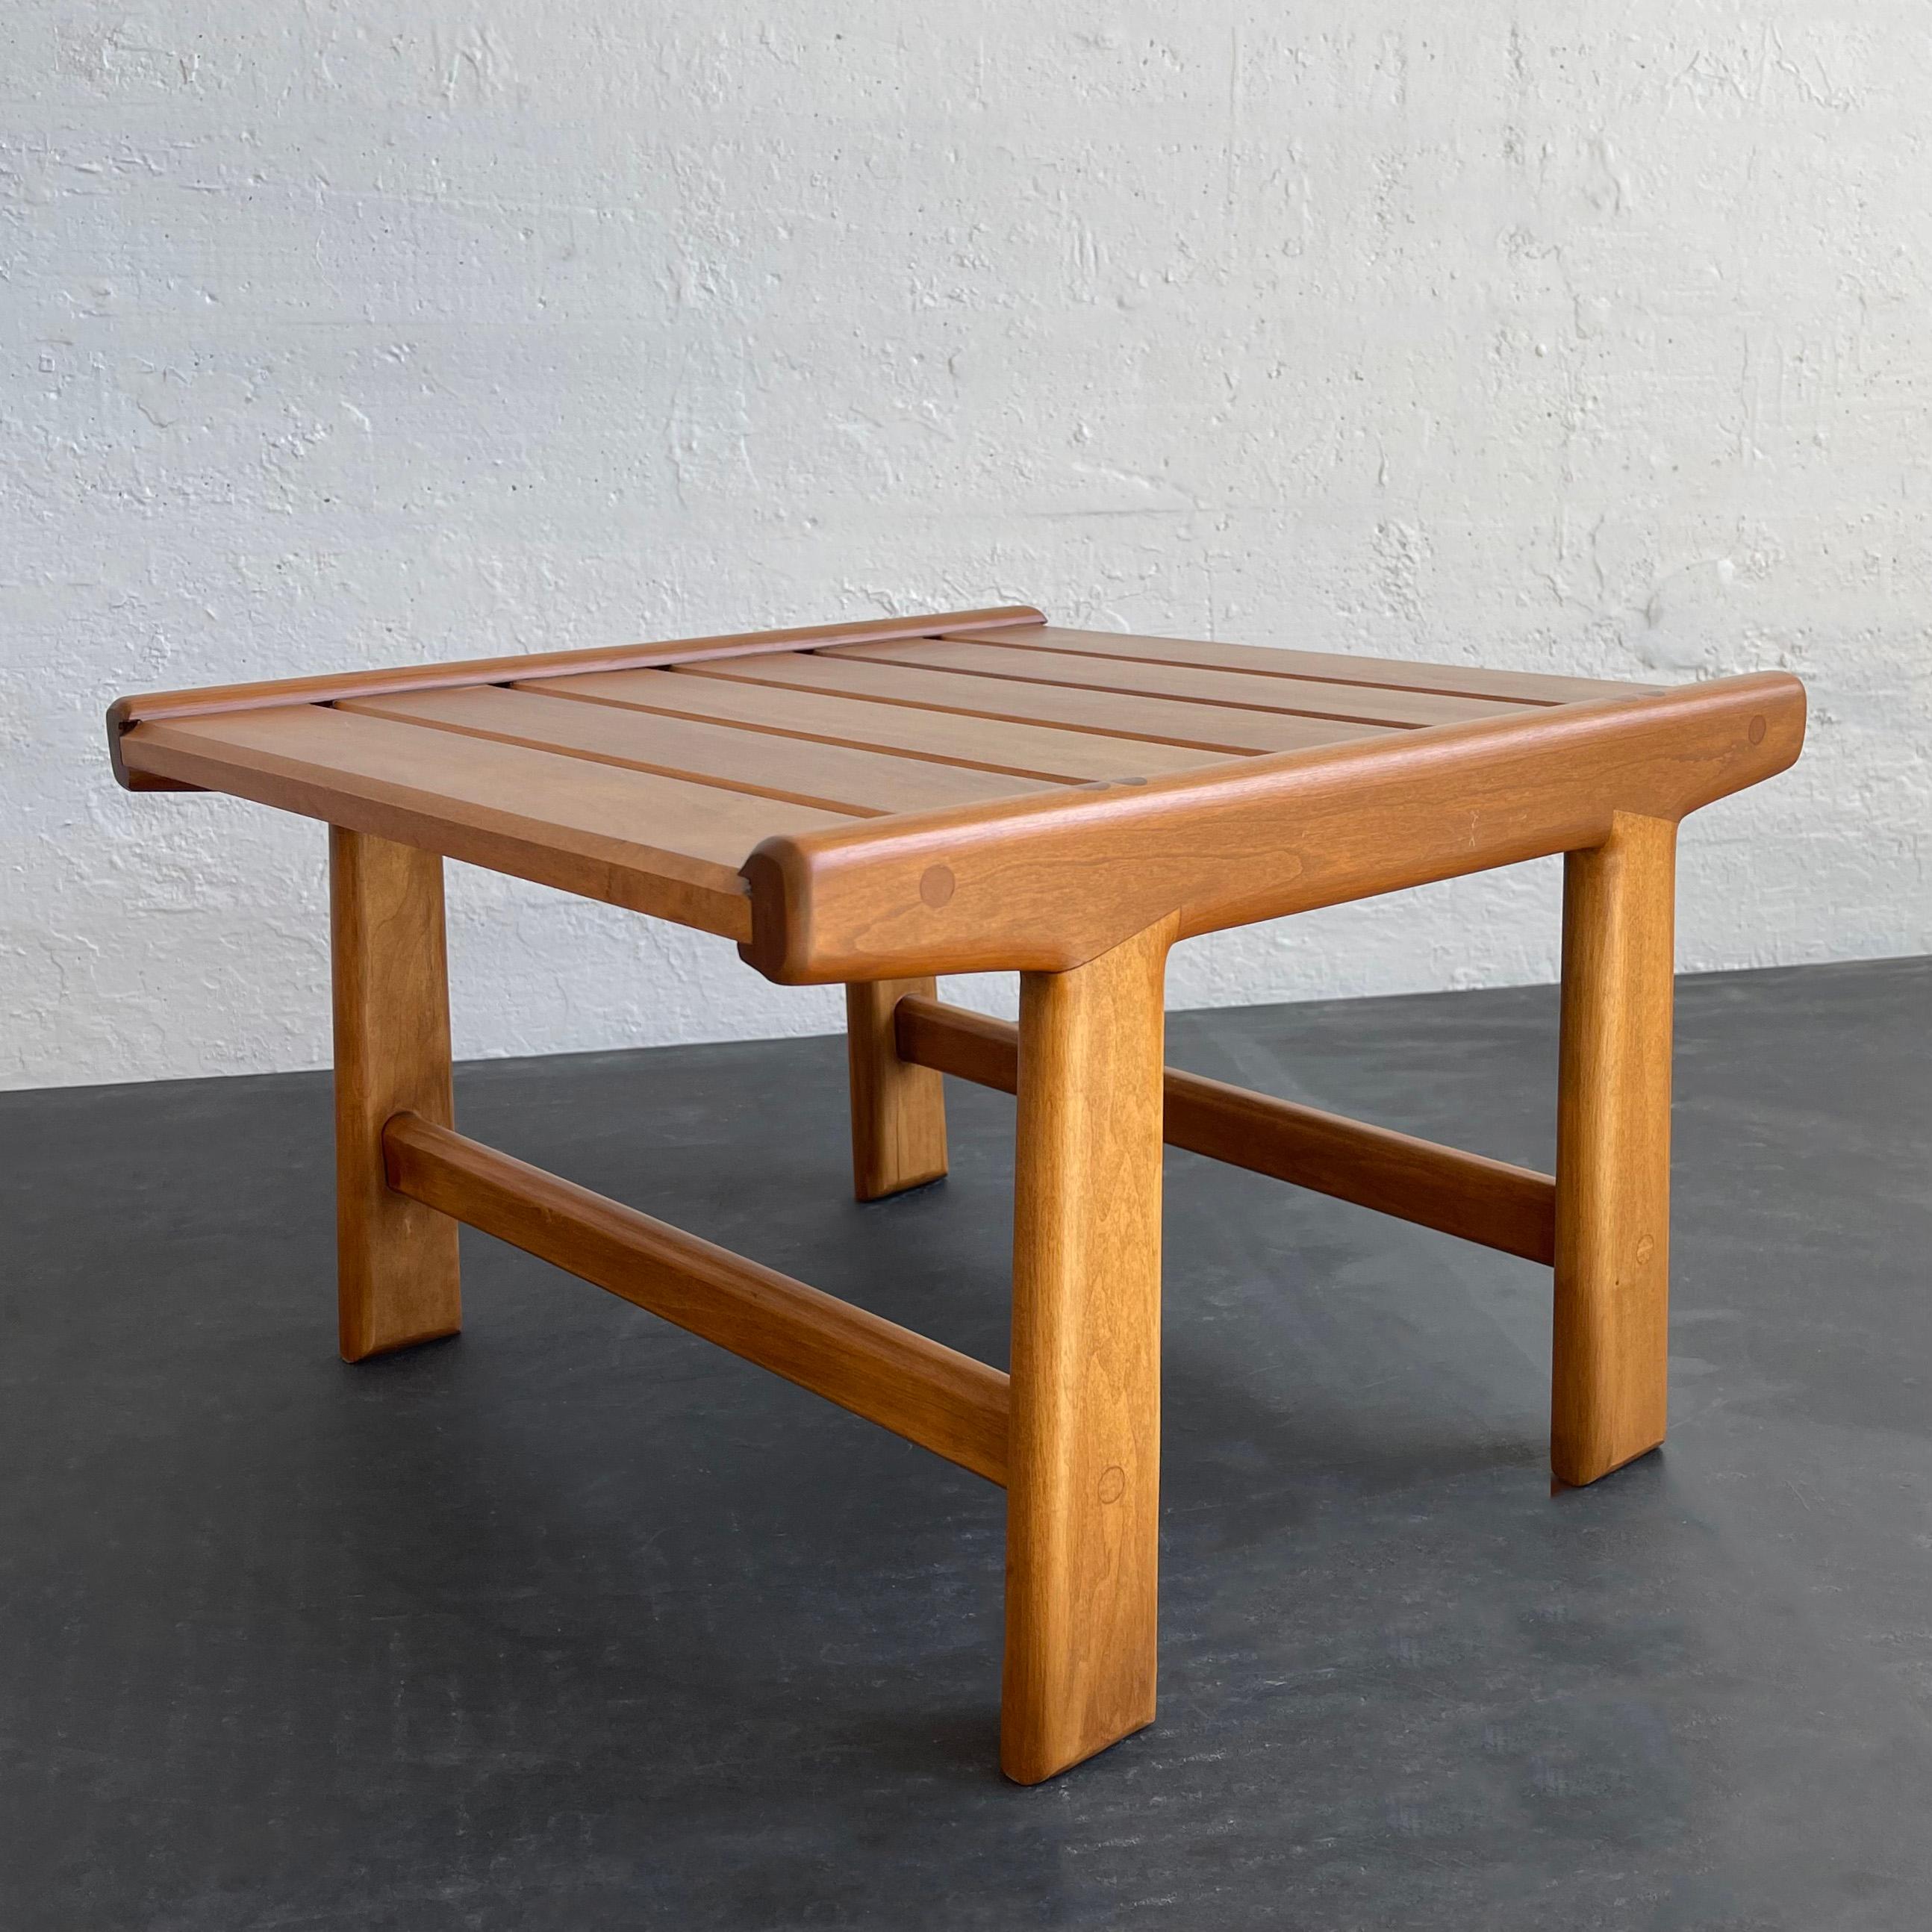 Mid-century modern, Scandinavian influenced, hand-crafted, slat elm wood foot stool / ottoman with clean lines and exposed dowl joinery can be used as a small low side table or as a low stool. 